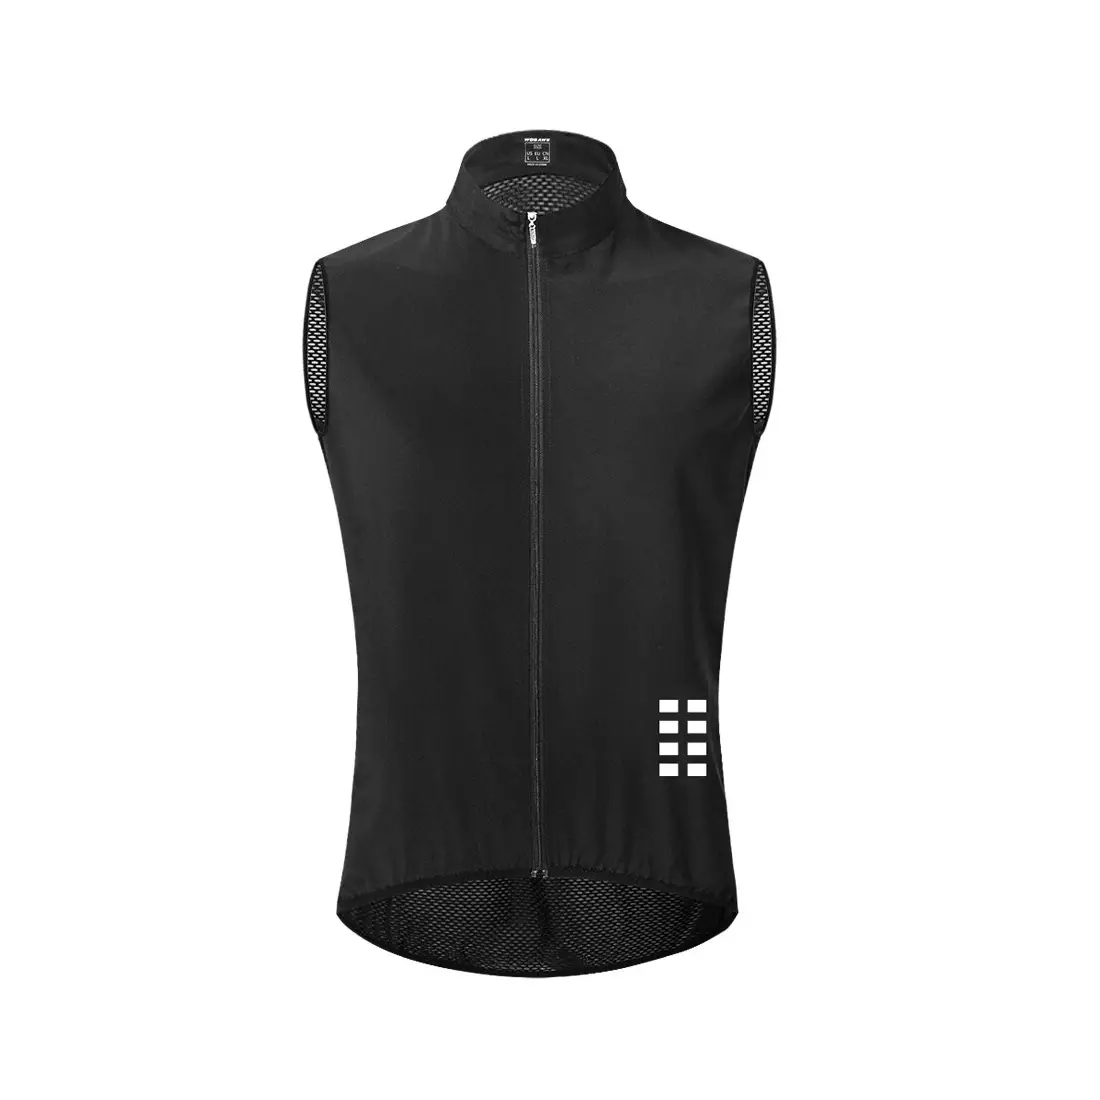 WOSAWE BL221-B men's windproof cycling vest with mesh back, black